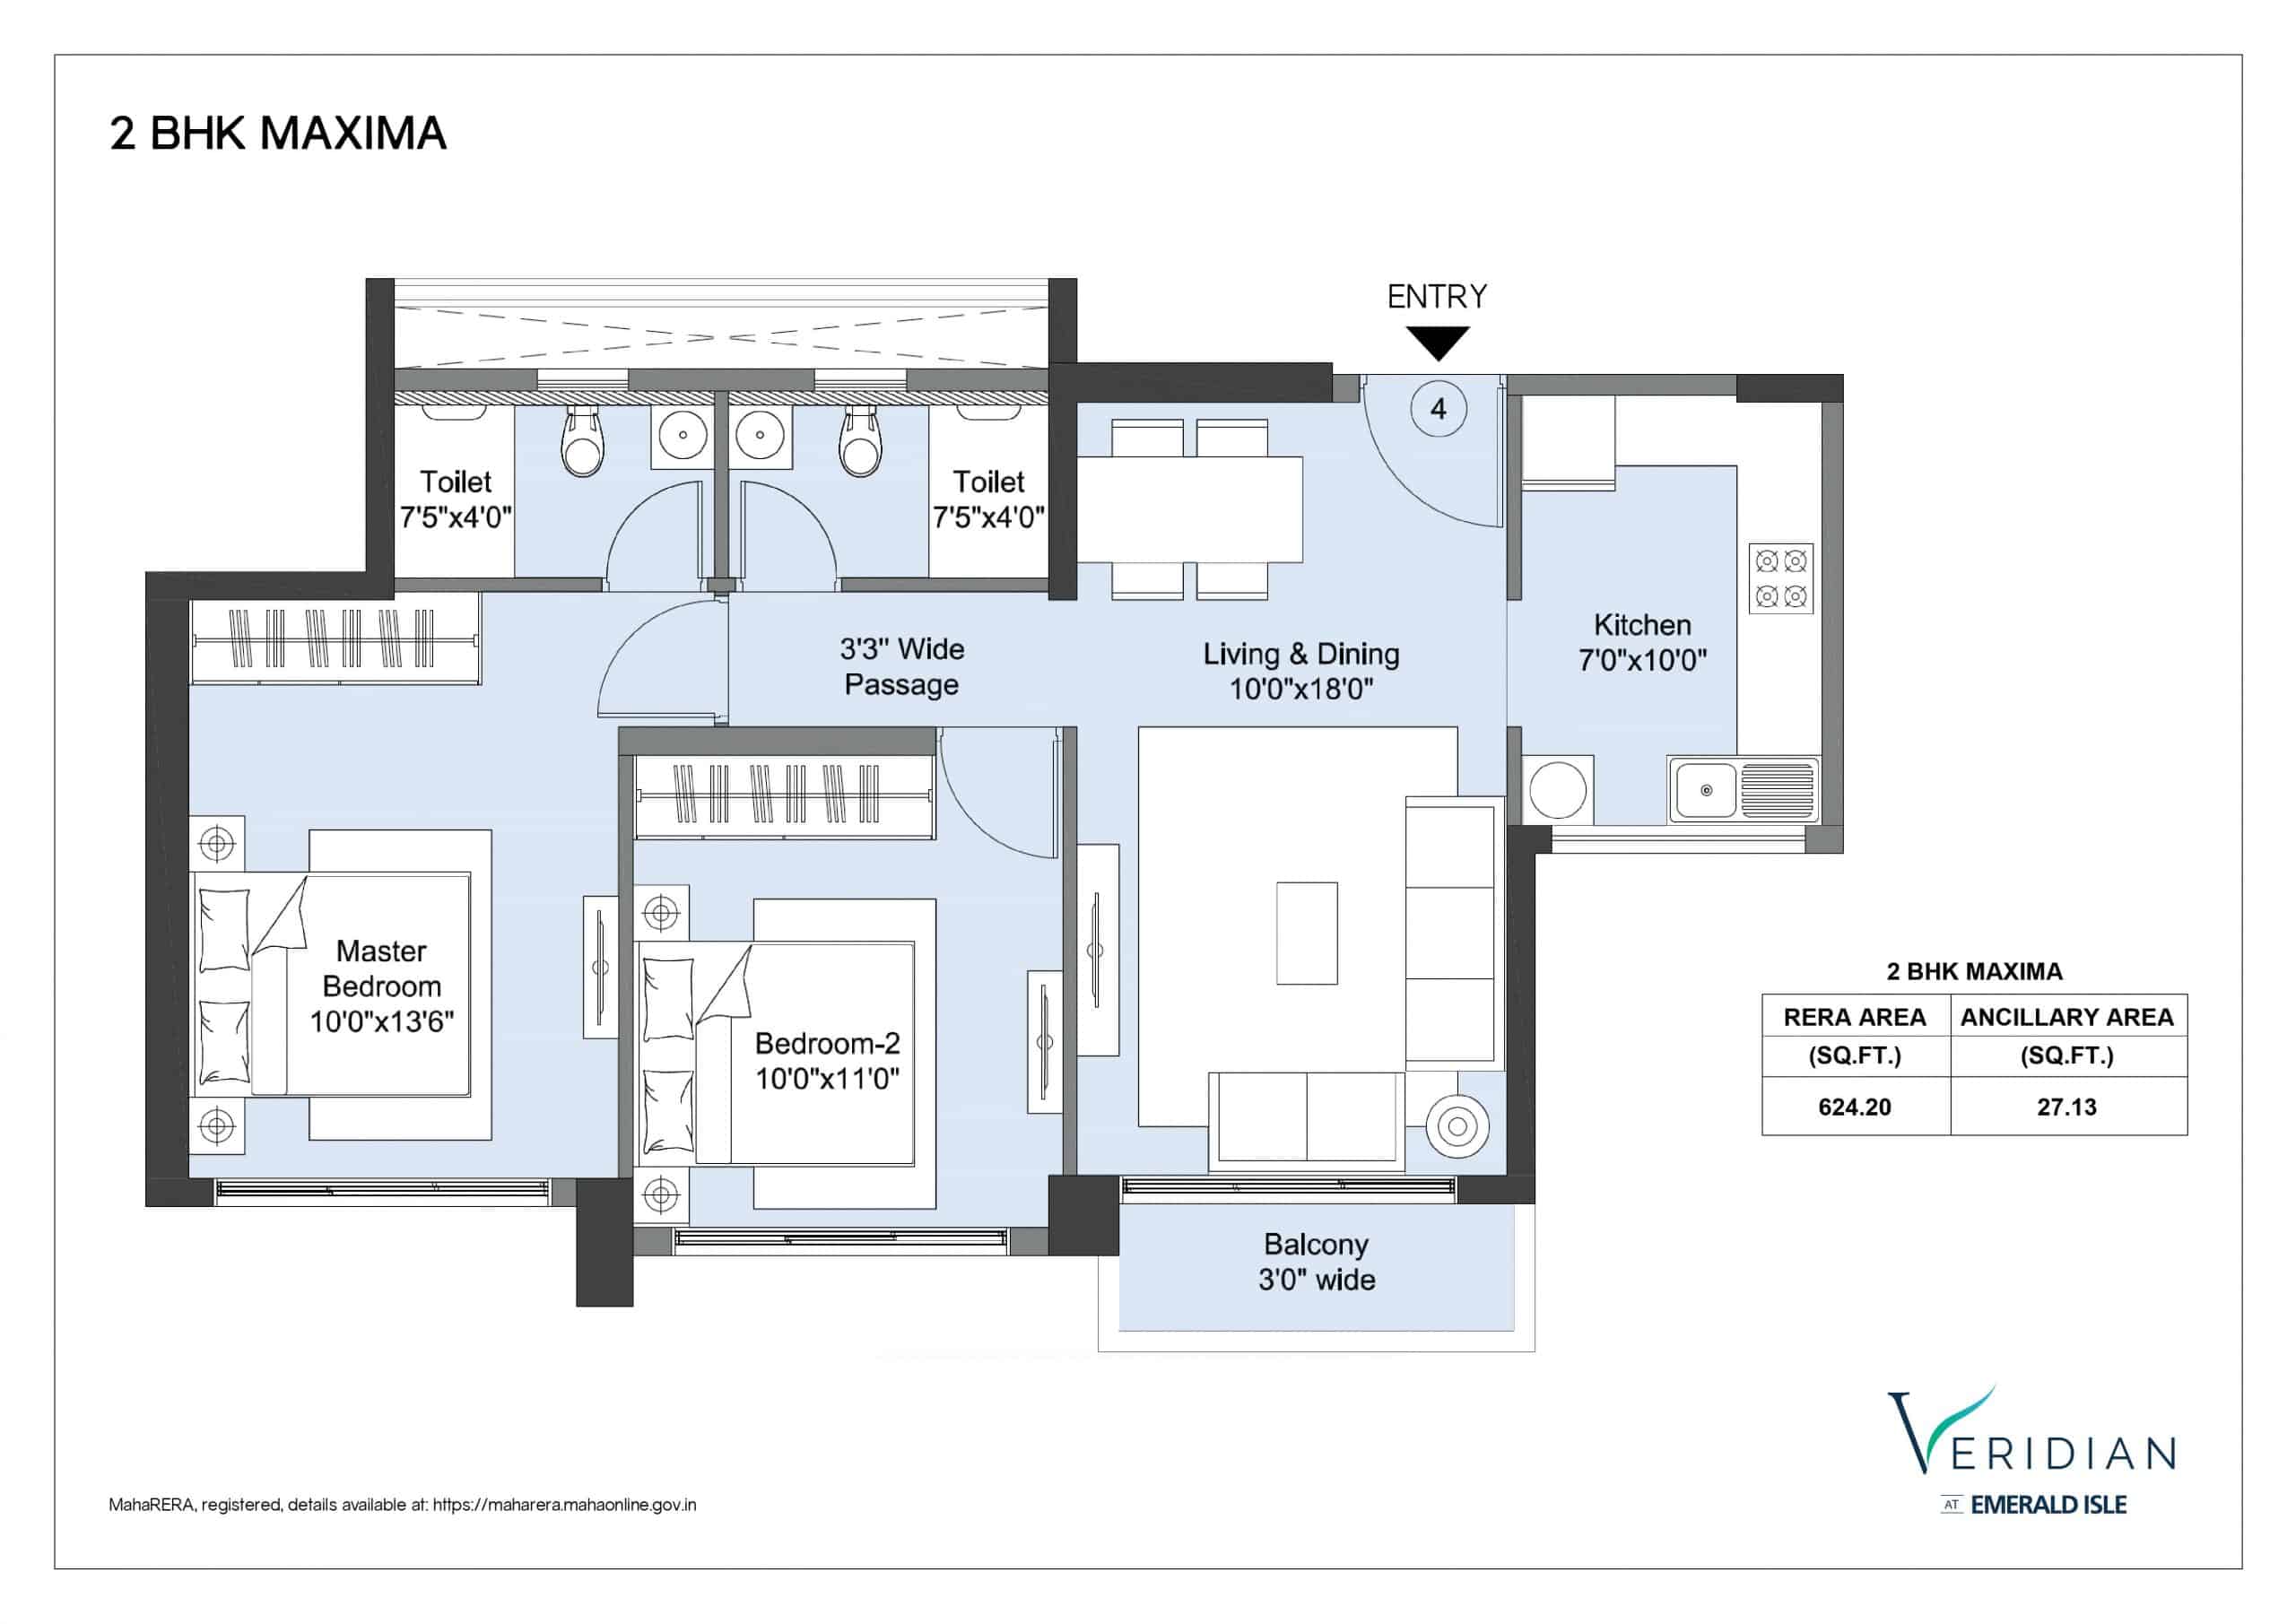 2 BHK Maxima at Veridian Scaled | L&T Realty